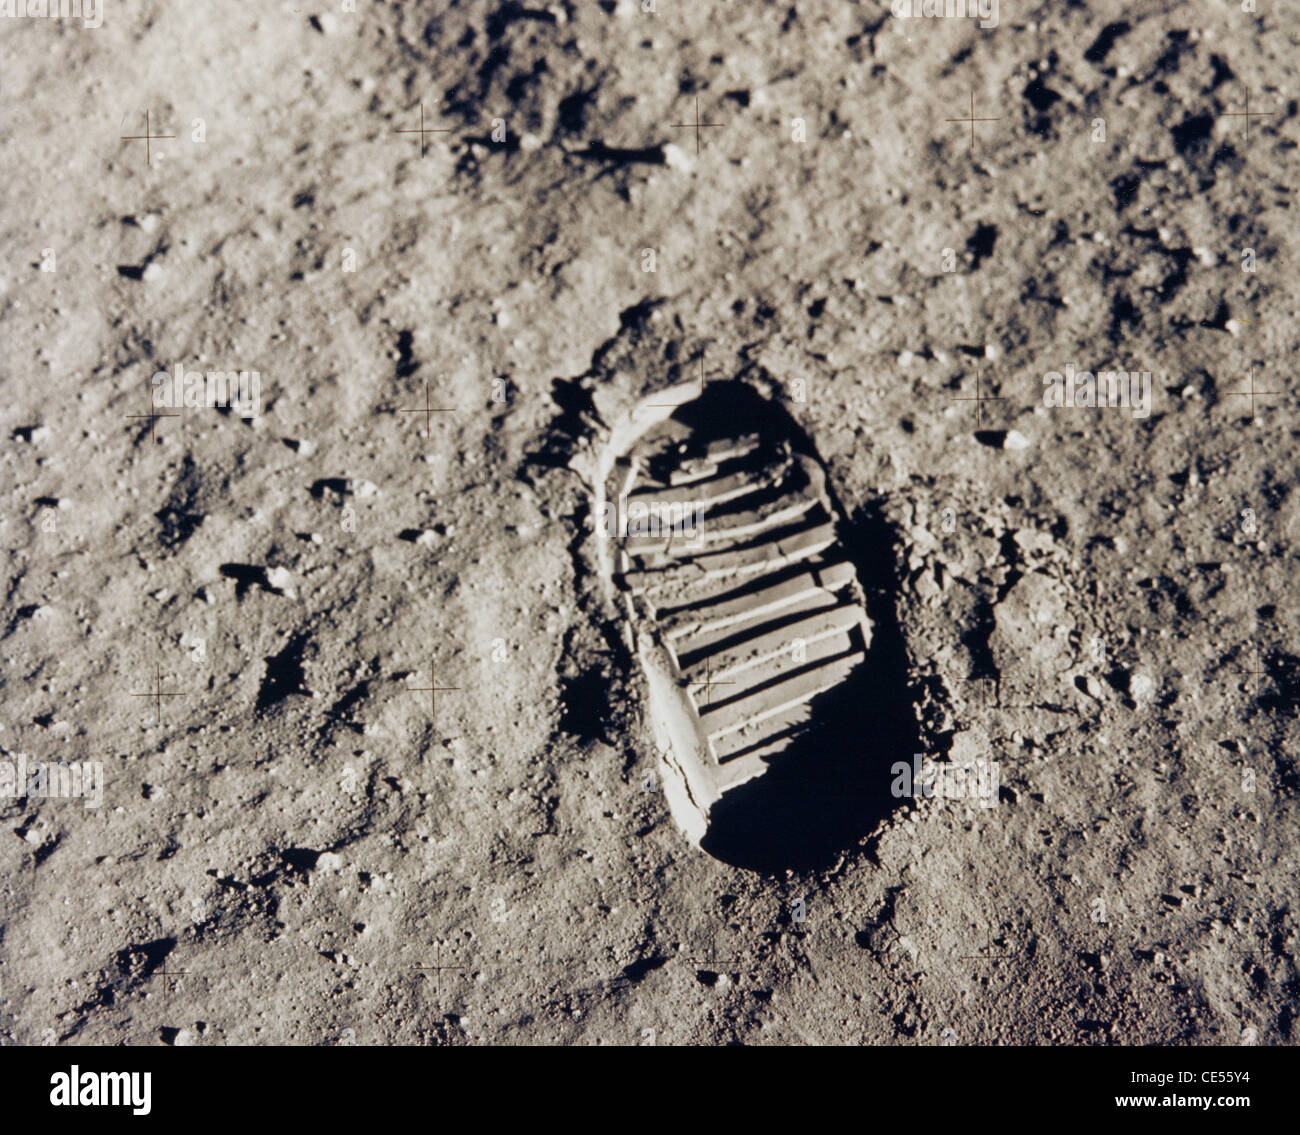 Buzz Aldrin, the pilot of the first lunar landing mission, leaves his bootprint during an Apollo 11 Extravehicular Activity Stock Photo